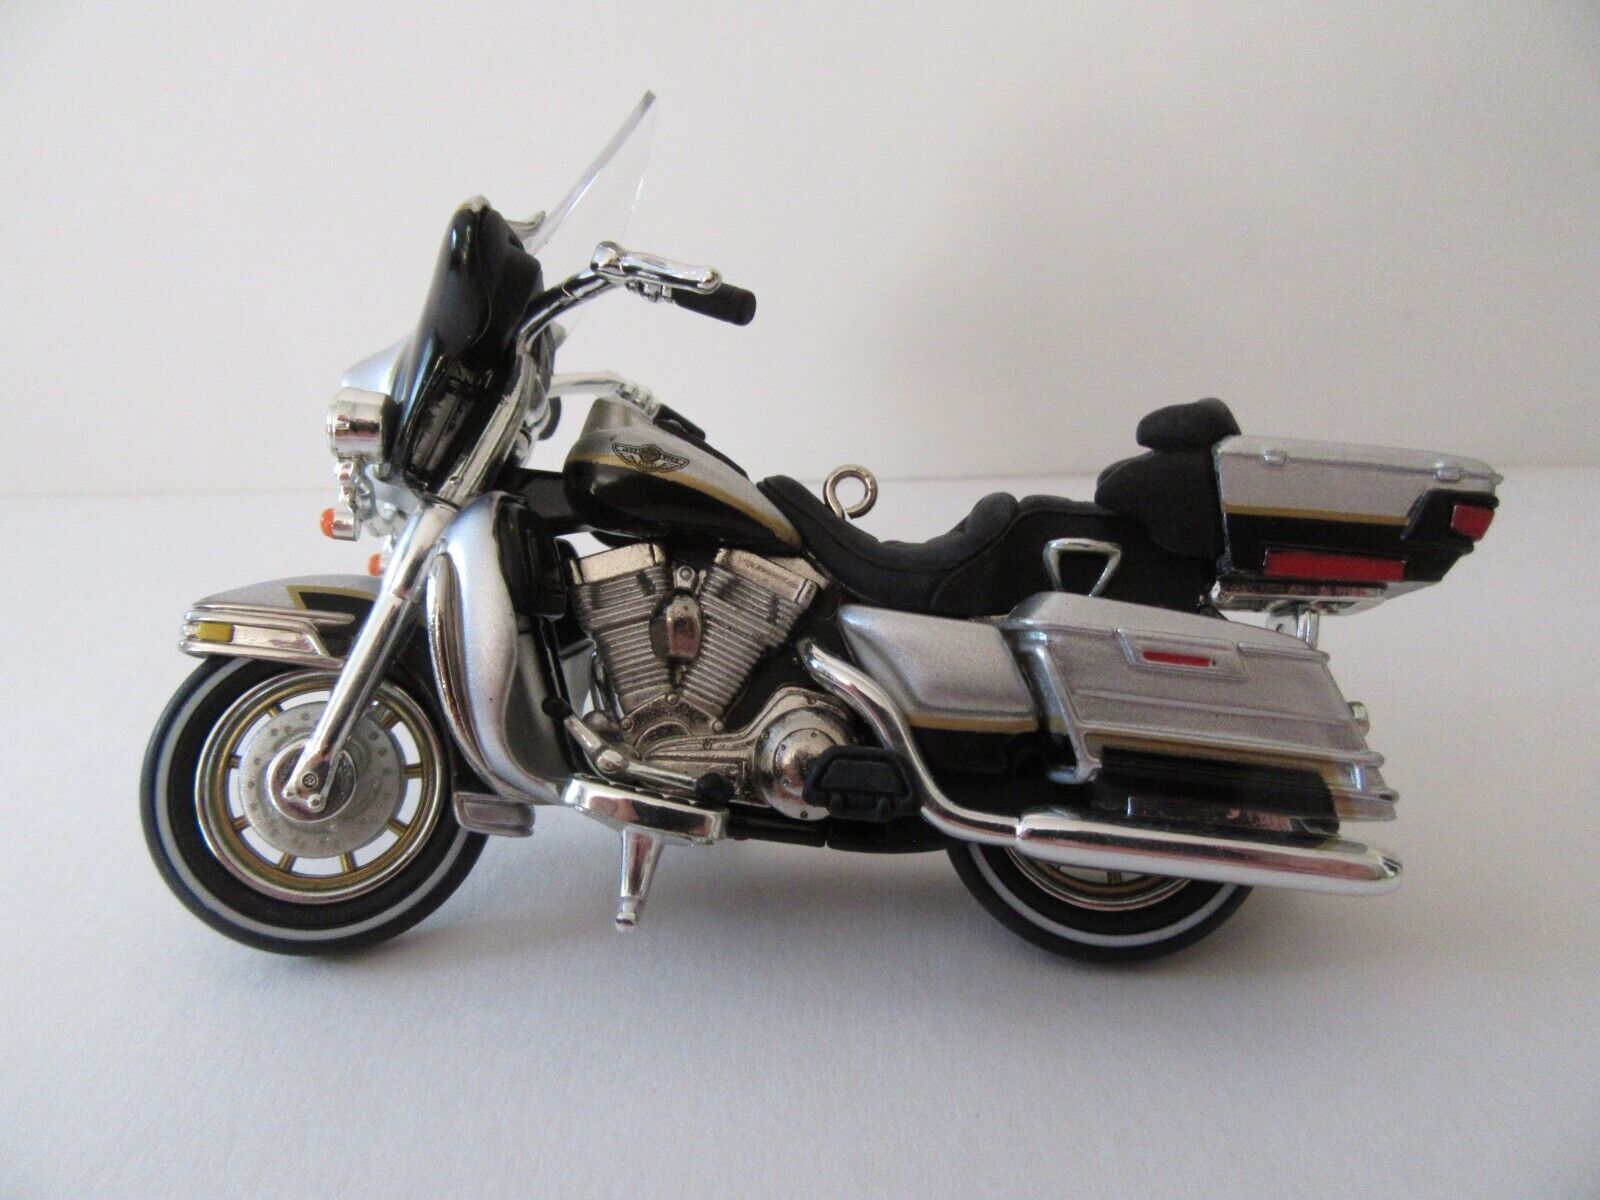 Hallmark 2003 Harley Ultra Classic Electra Glide Motorcycle Ornament New in Box